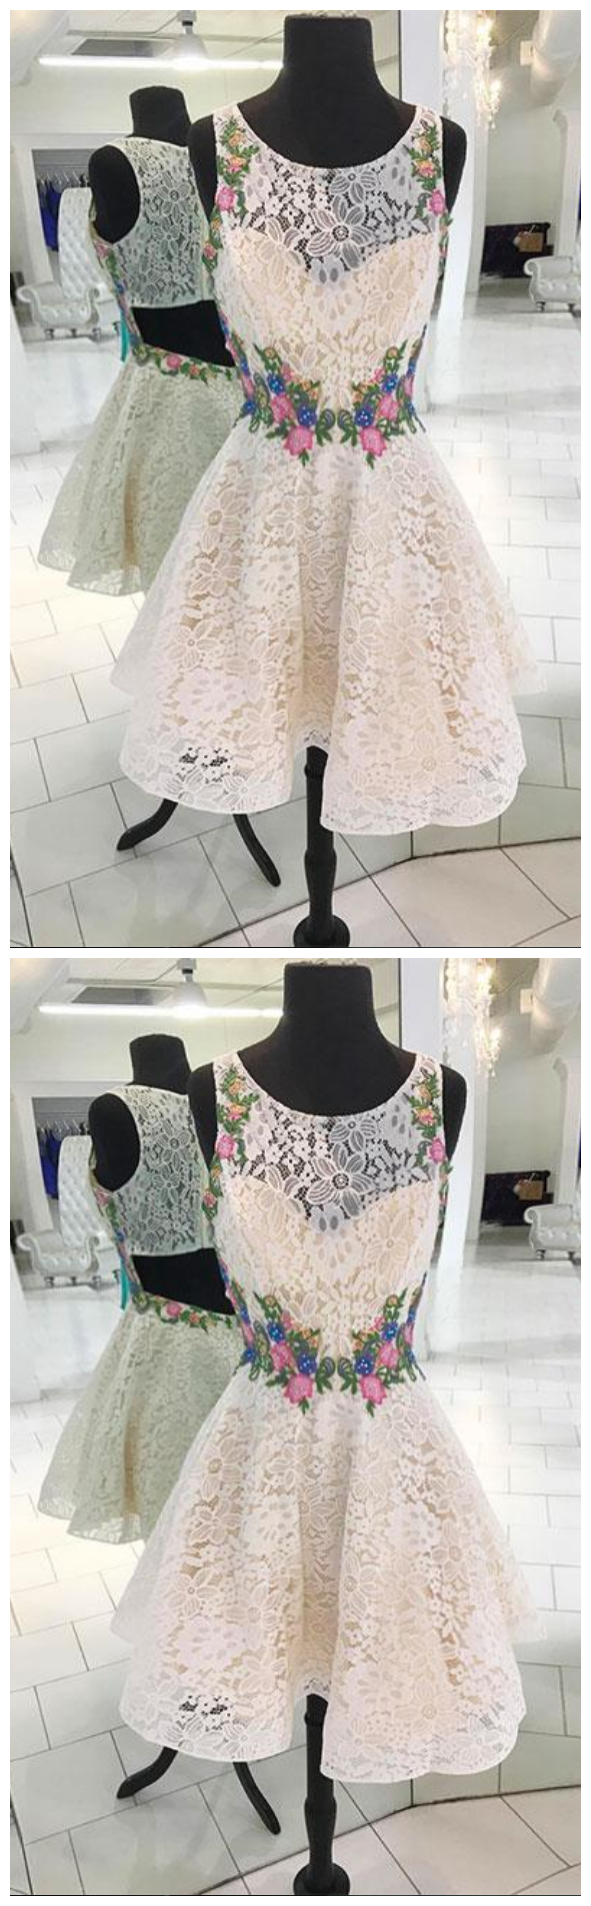 White Round Neck Lace Short Prom Dress, Lace Homecoming Dress